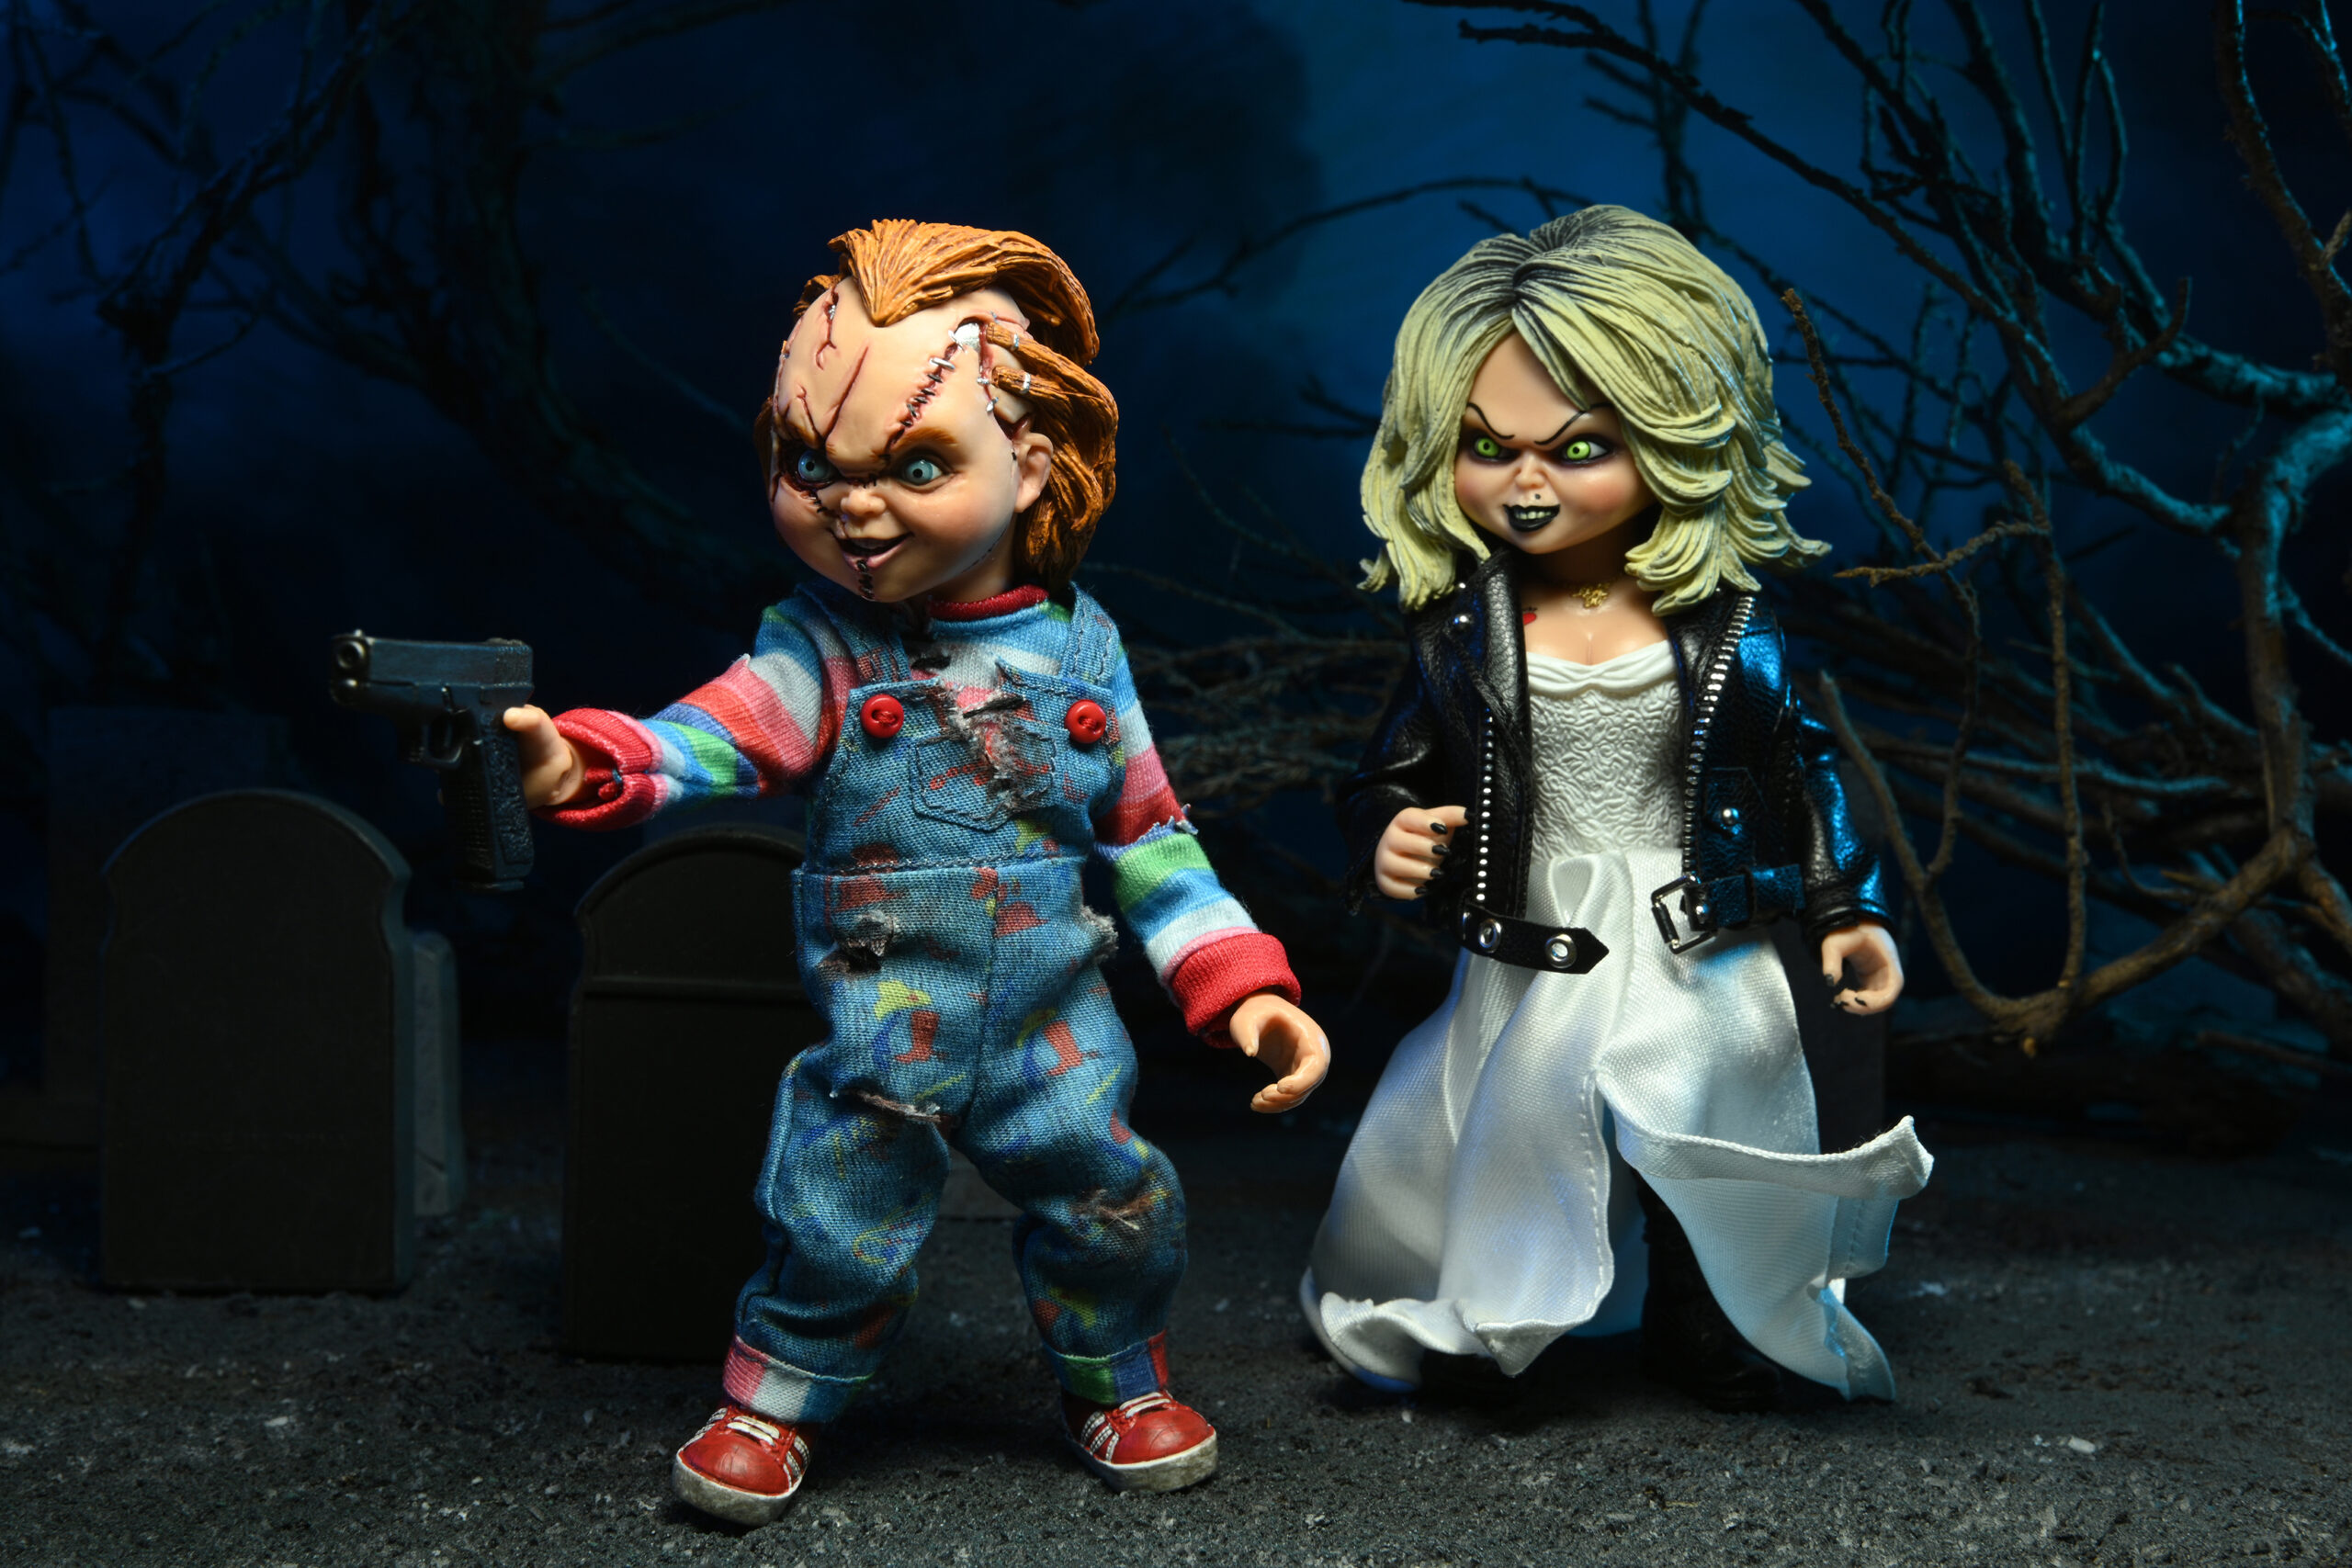 Bride of Chucky - 8" Scale Clothed Figure - Chucky & Tiffany 2.